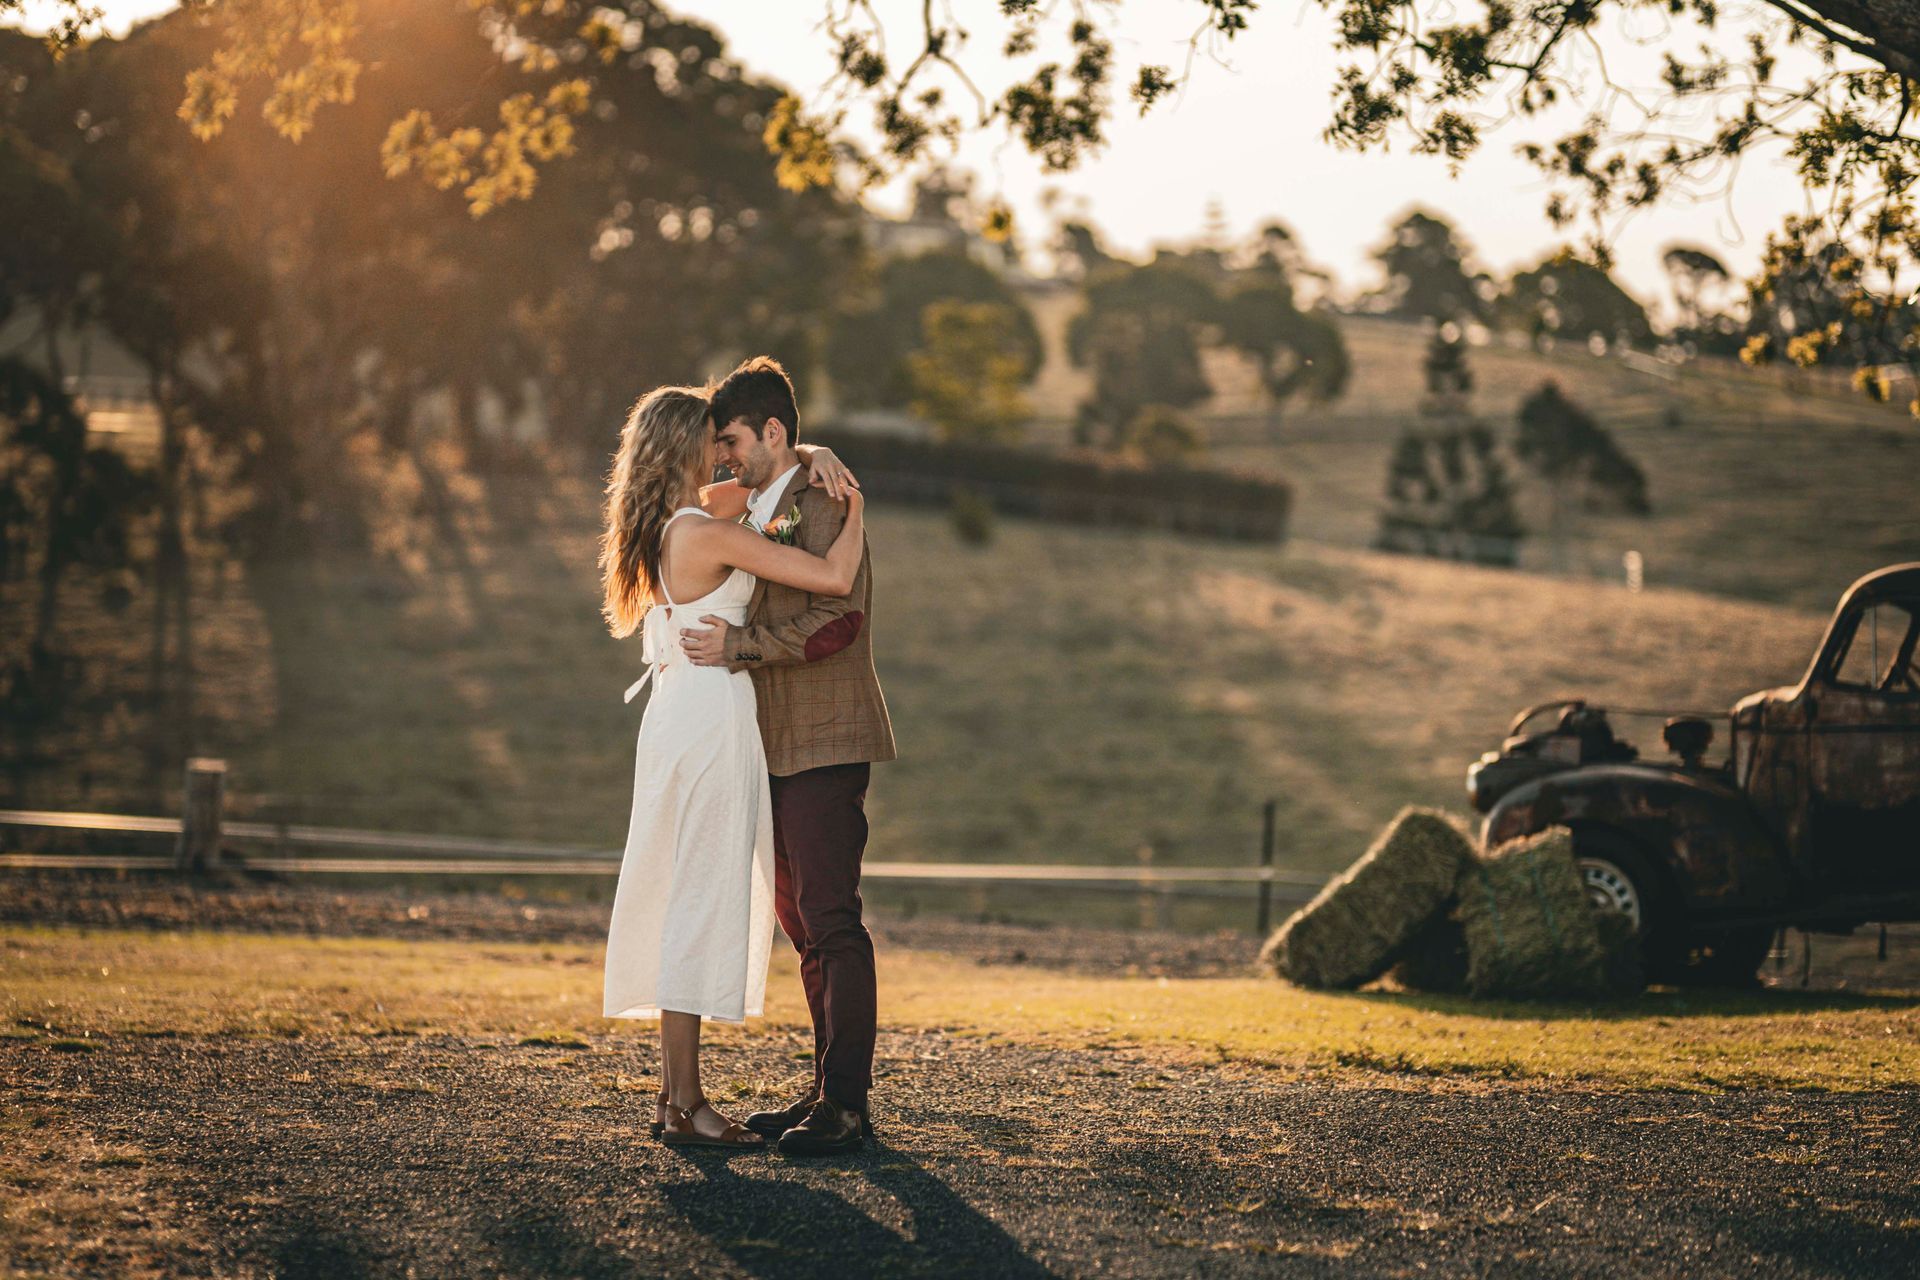 Brisbane Wedding Video and Photo Package